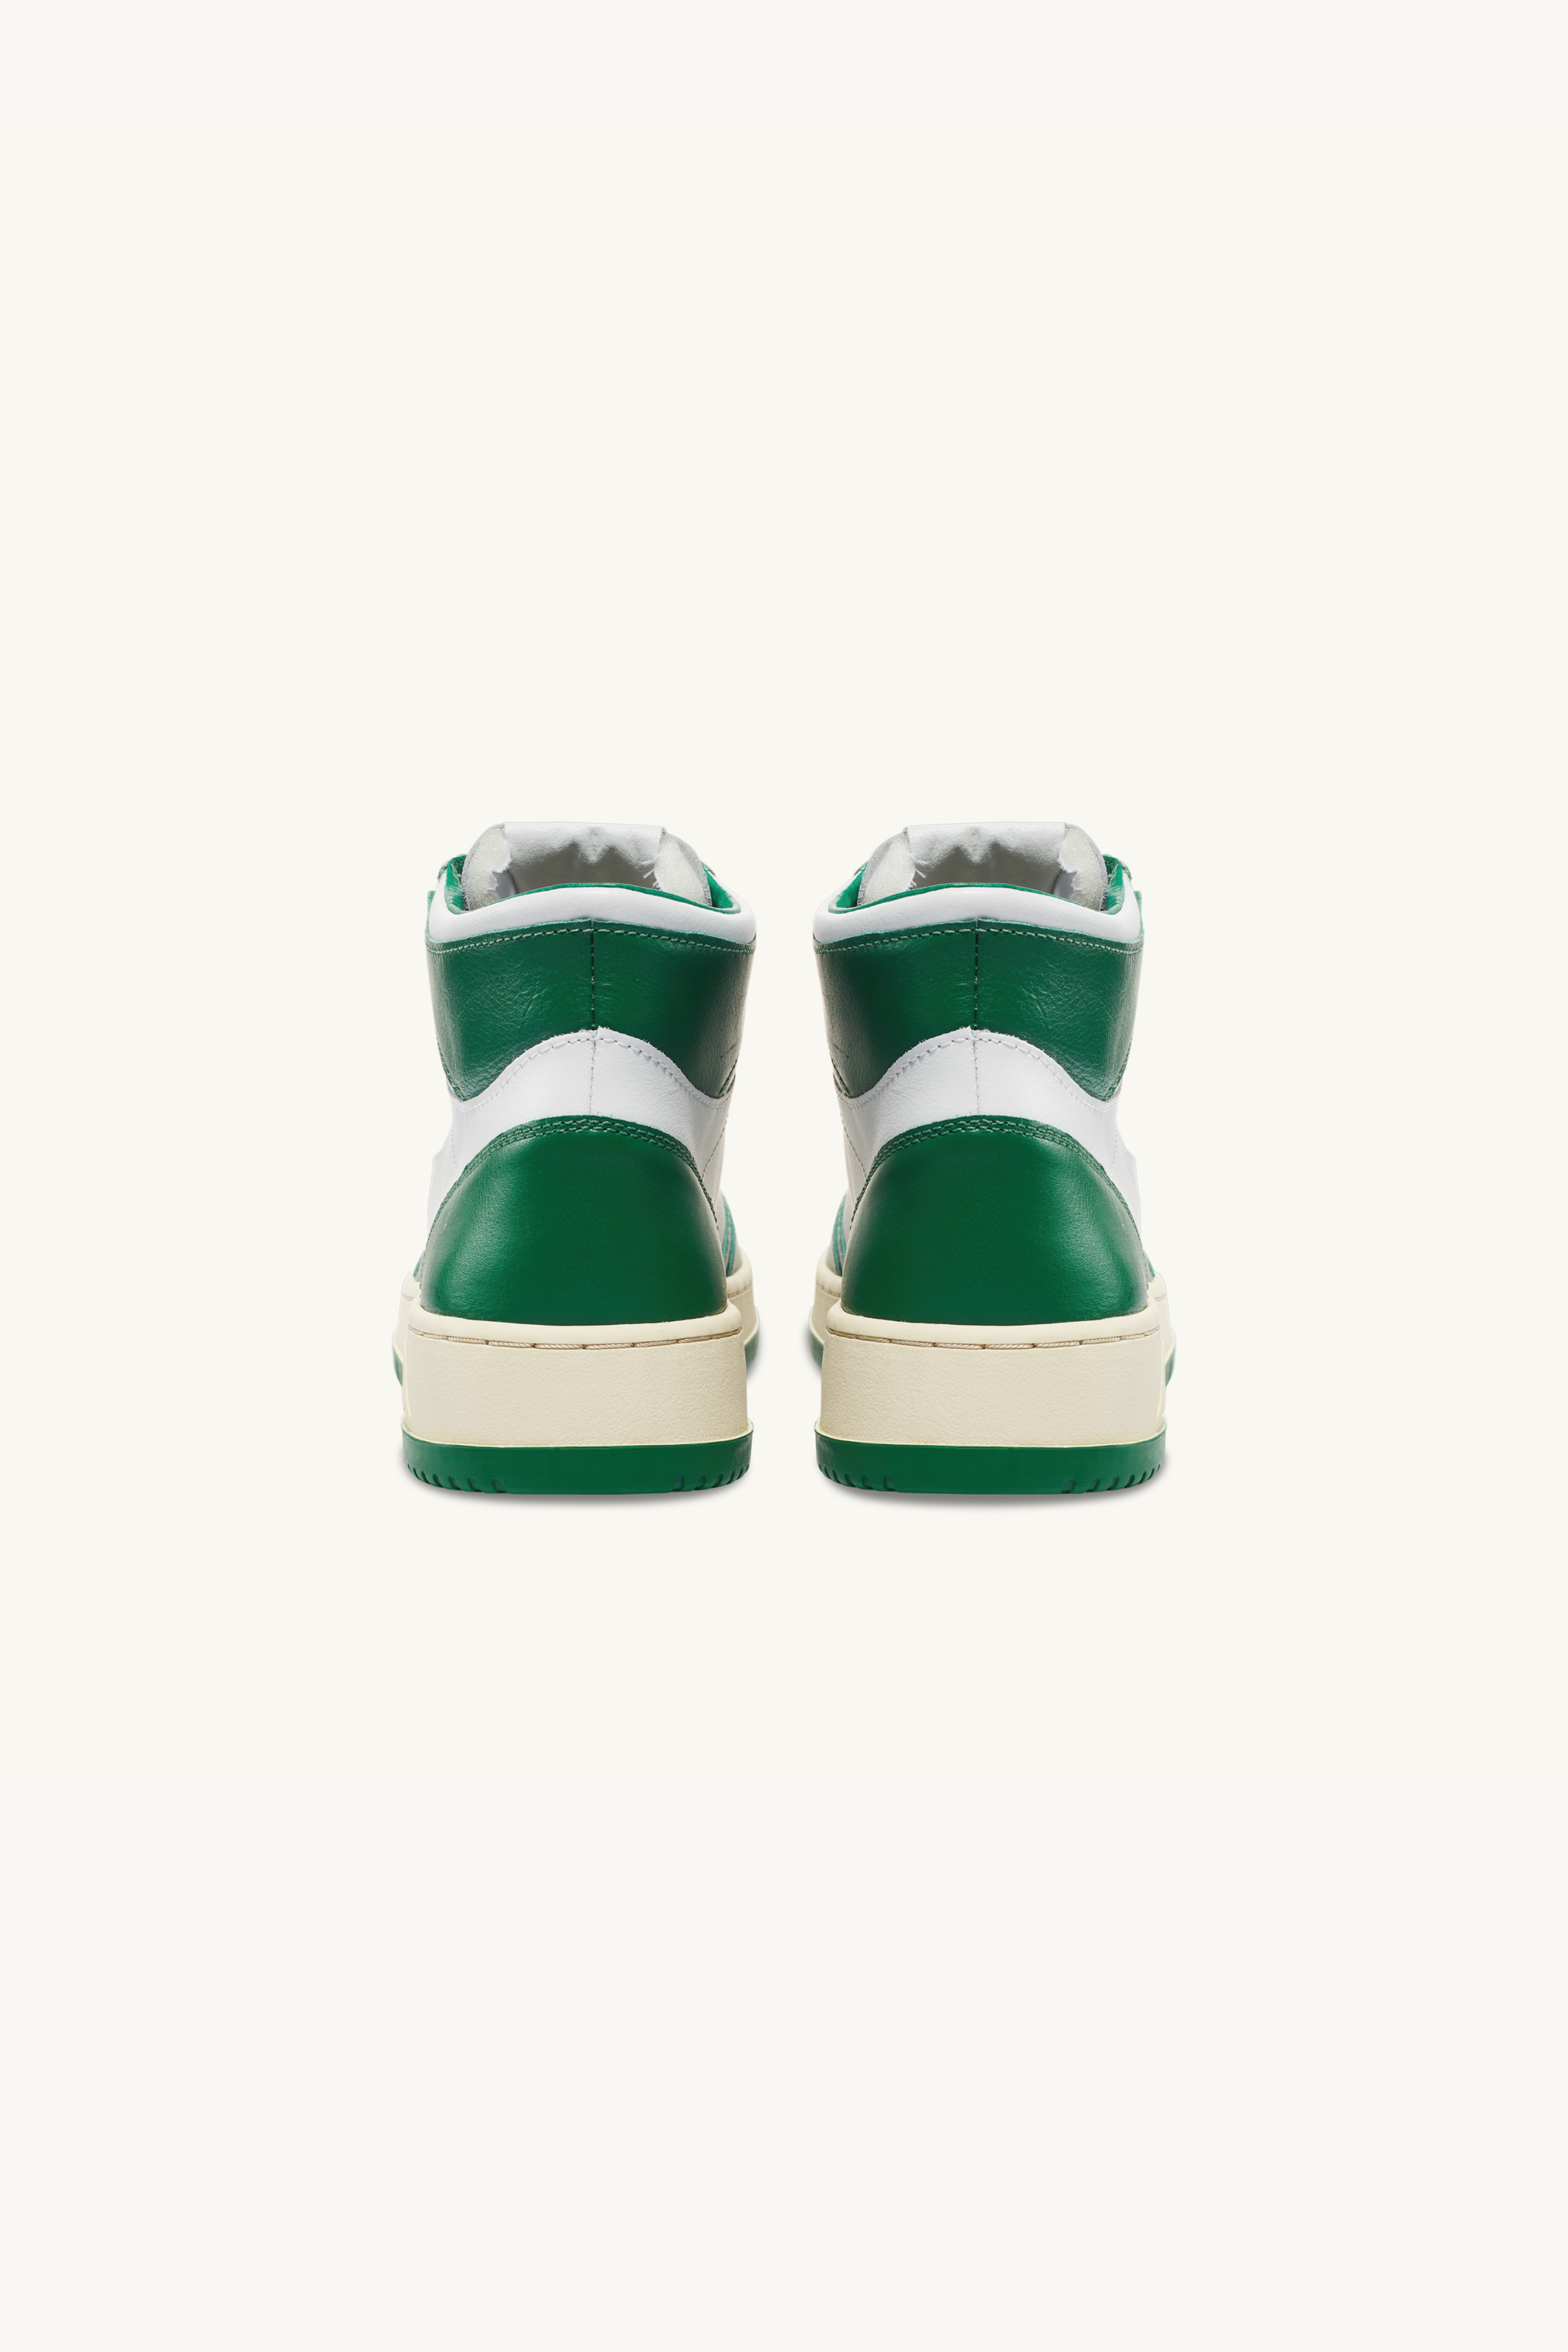 AUMM-WB03 - MEDALIST MID SNEAKERS IN TWO-TONE LEATHER COLOR WHITE AND GREEN